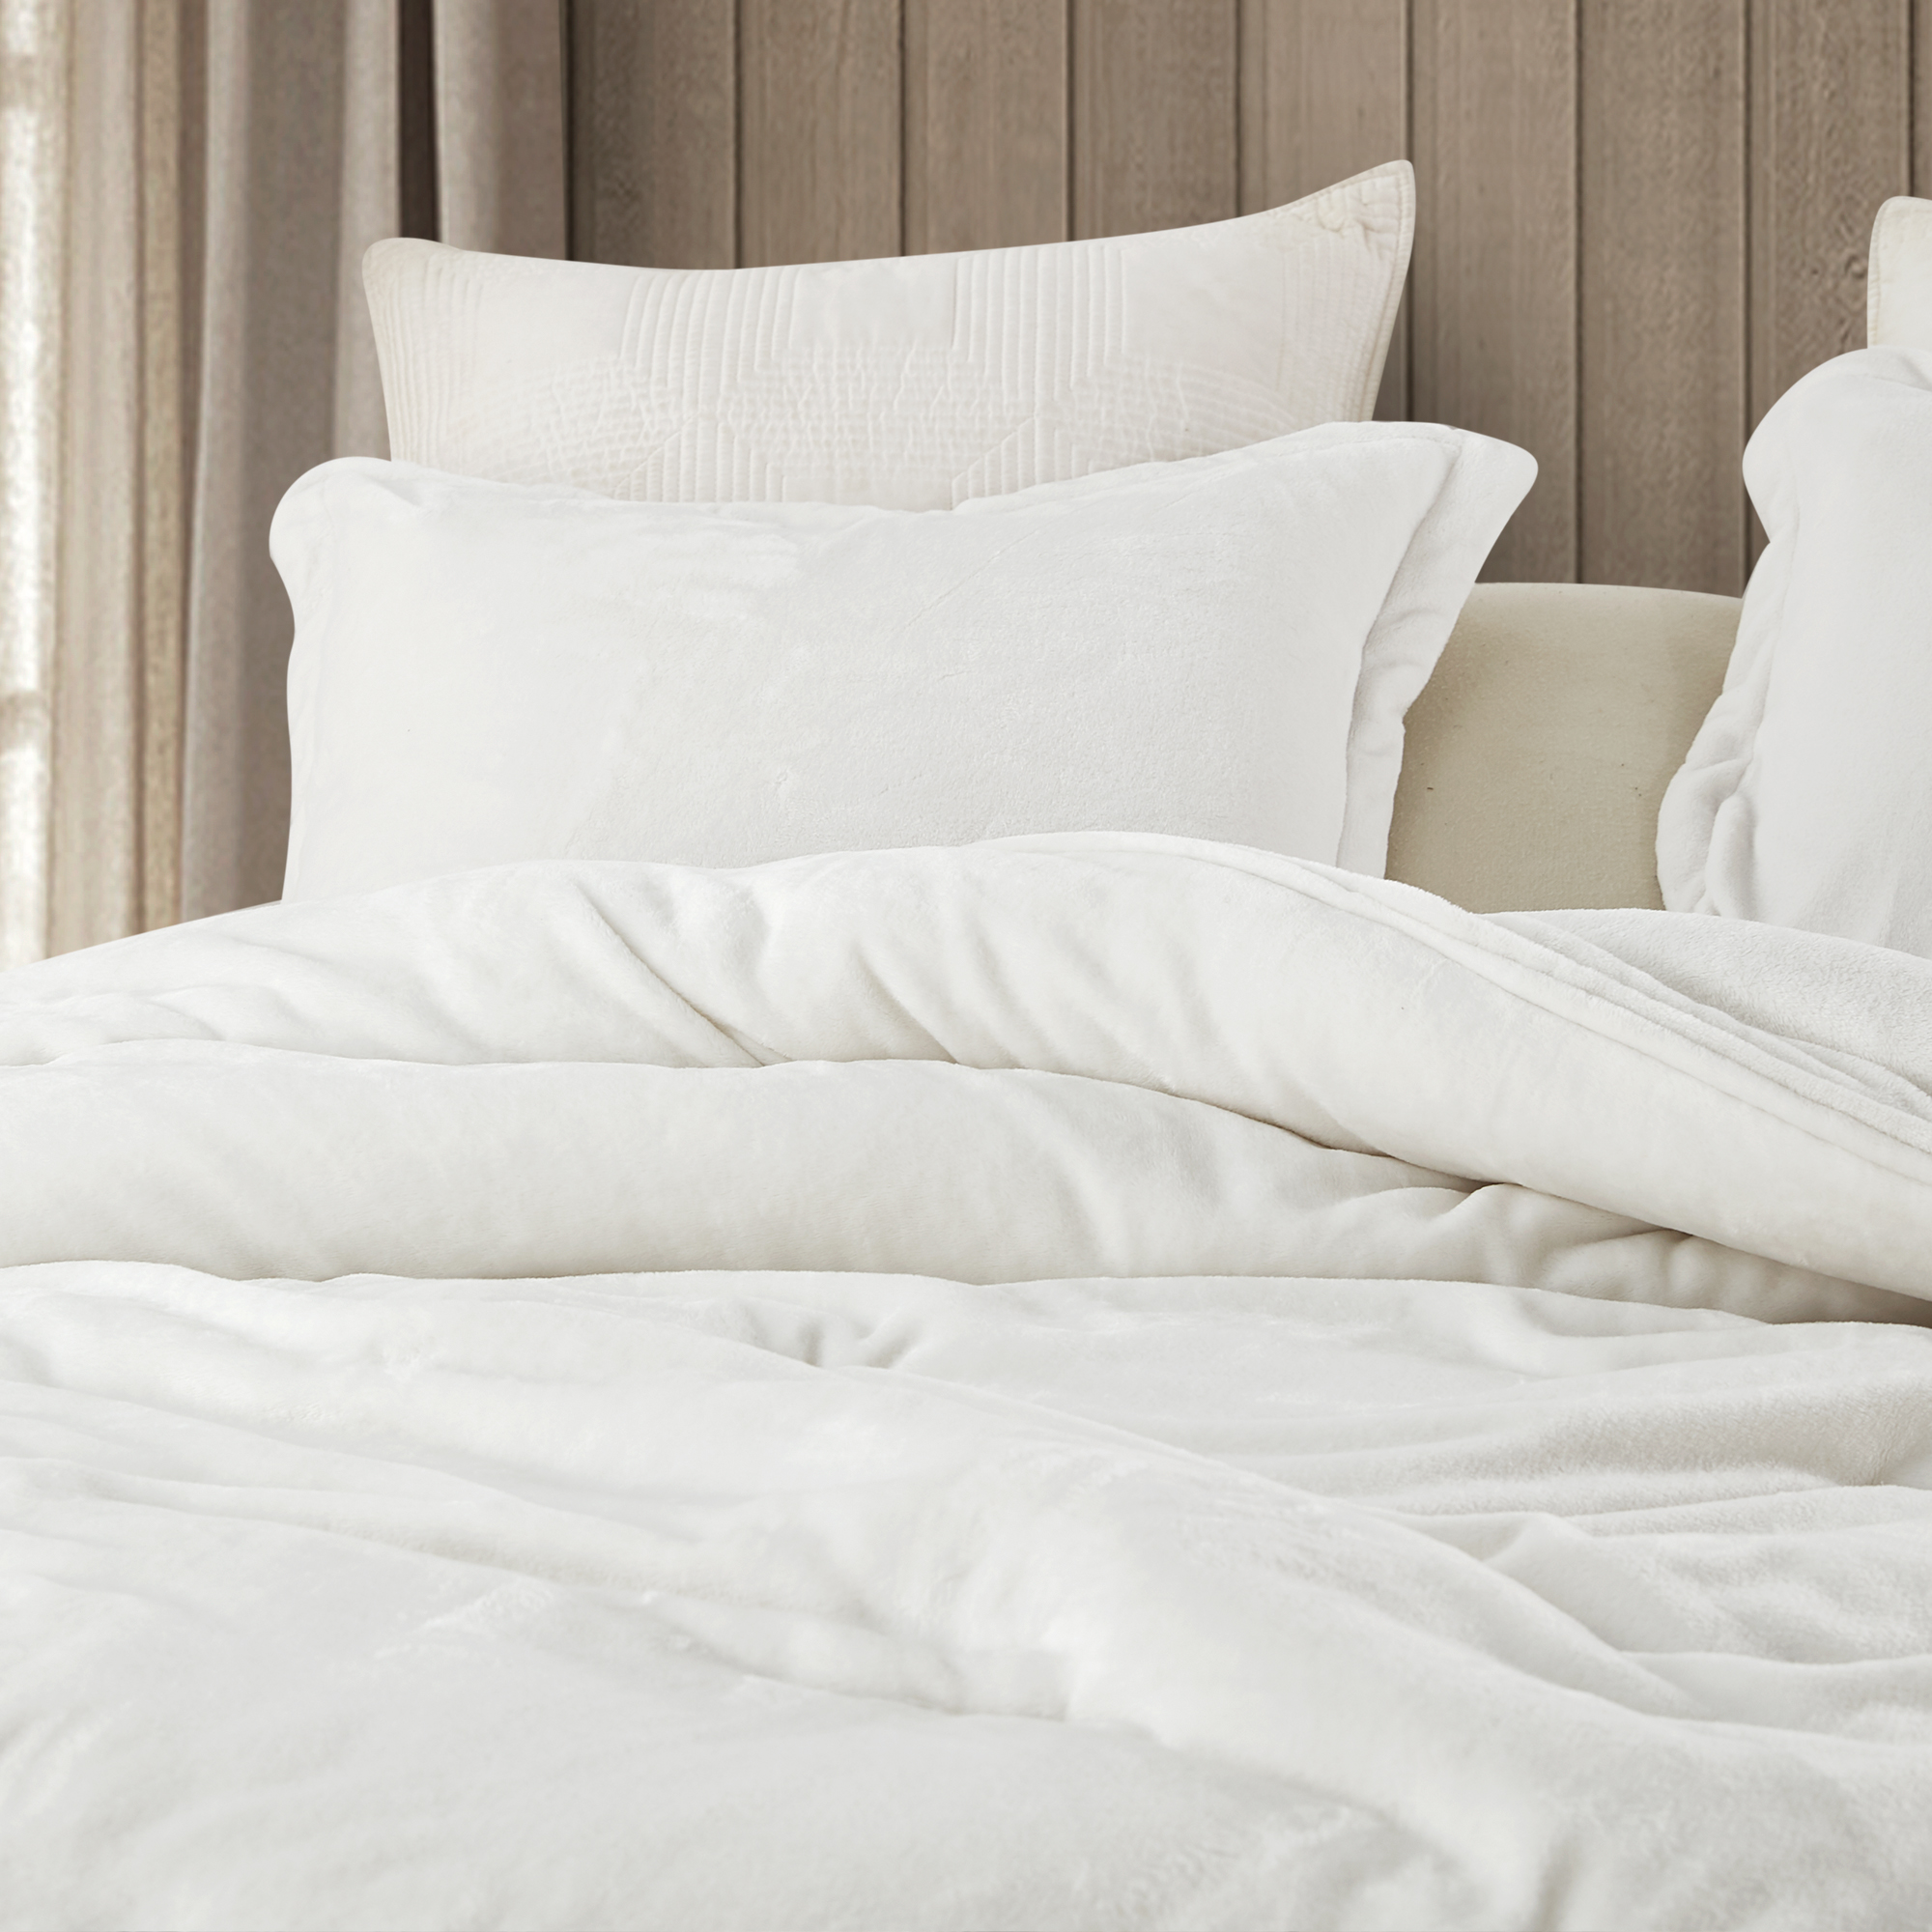 Coma Inducer® Oversized Queen Comforter - Wait Oh What - Farmhouse White